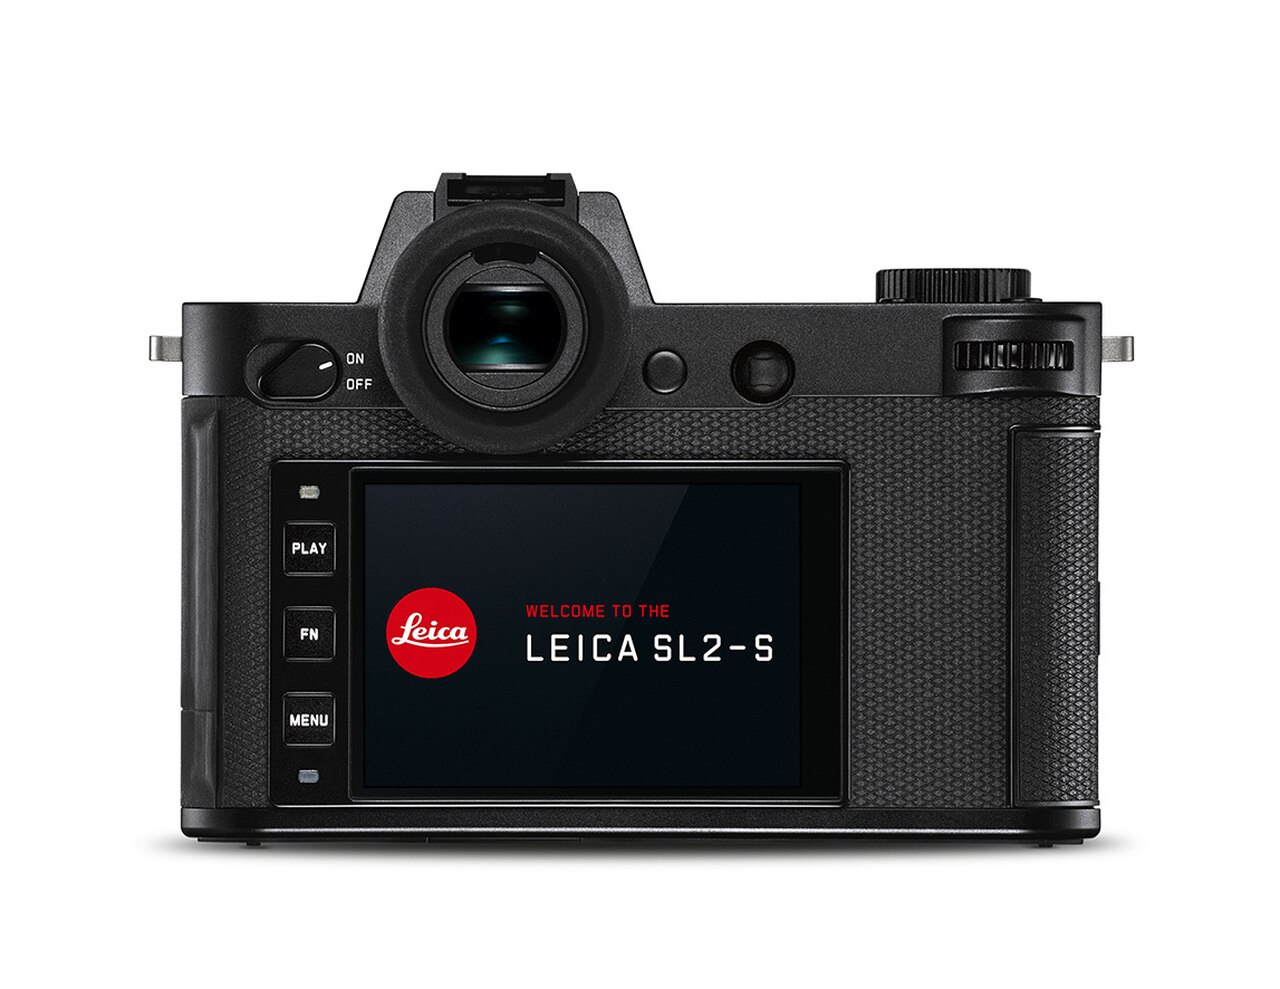 detailed-leica-sl2-s-specifications-leaked-online-leica-rumors